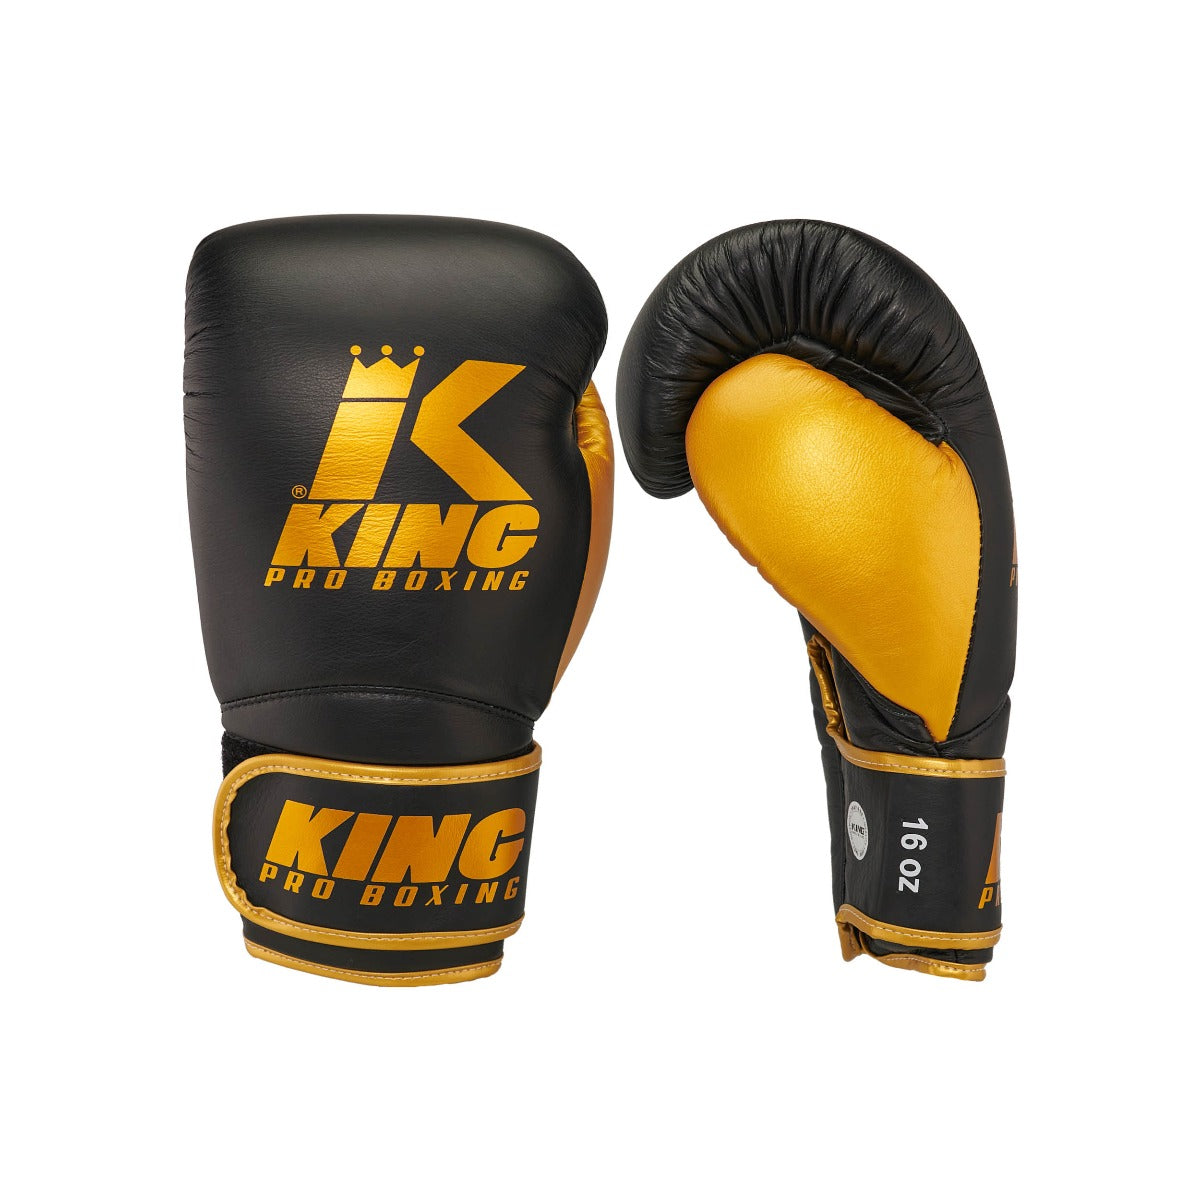 King PRO boxing boxing gloves - STAR 16